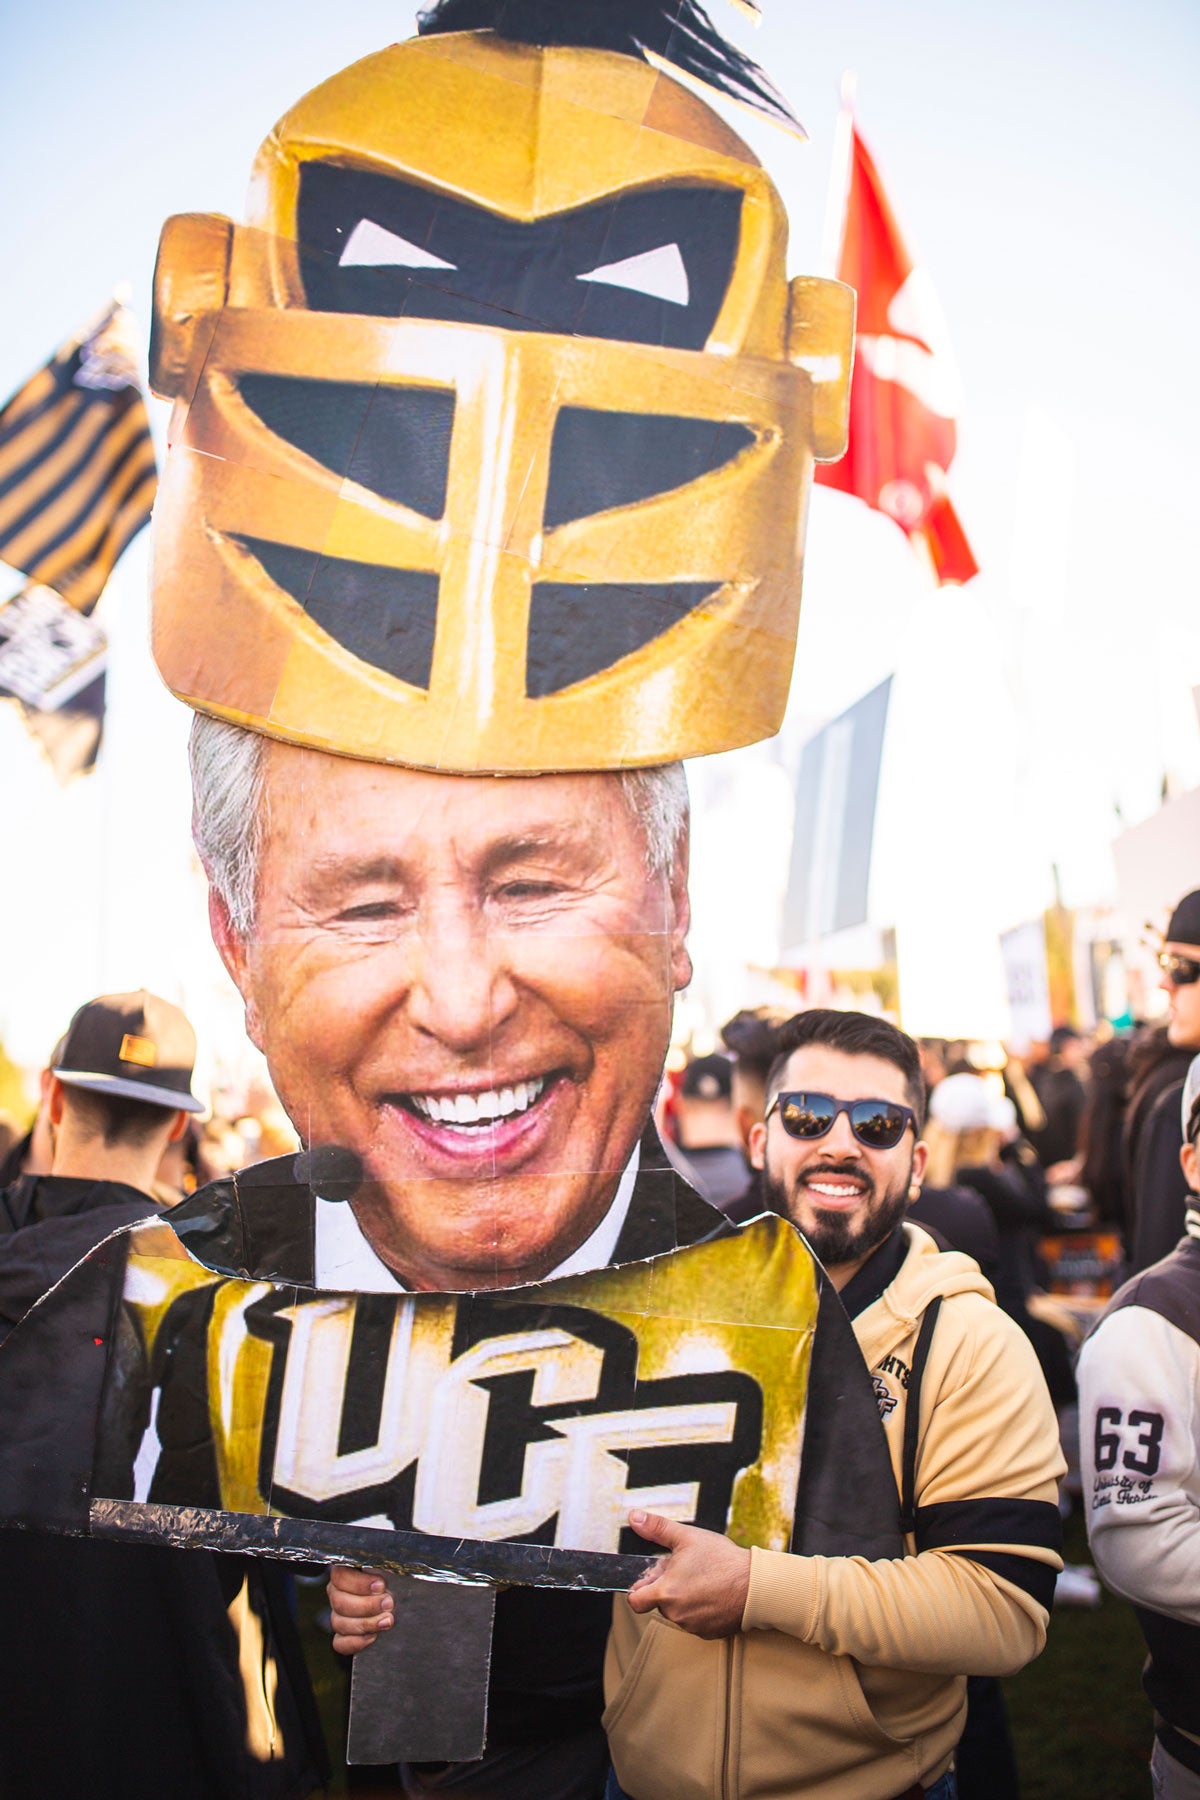 Man wearing a black and gold jersey holds a cutout of Lee Corso head with Knightro mask